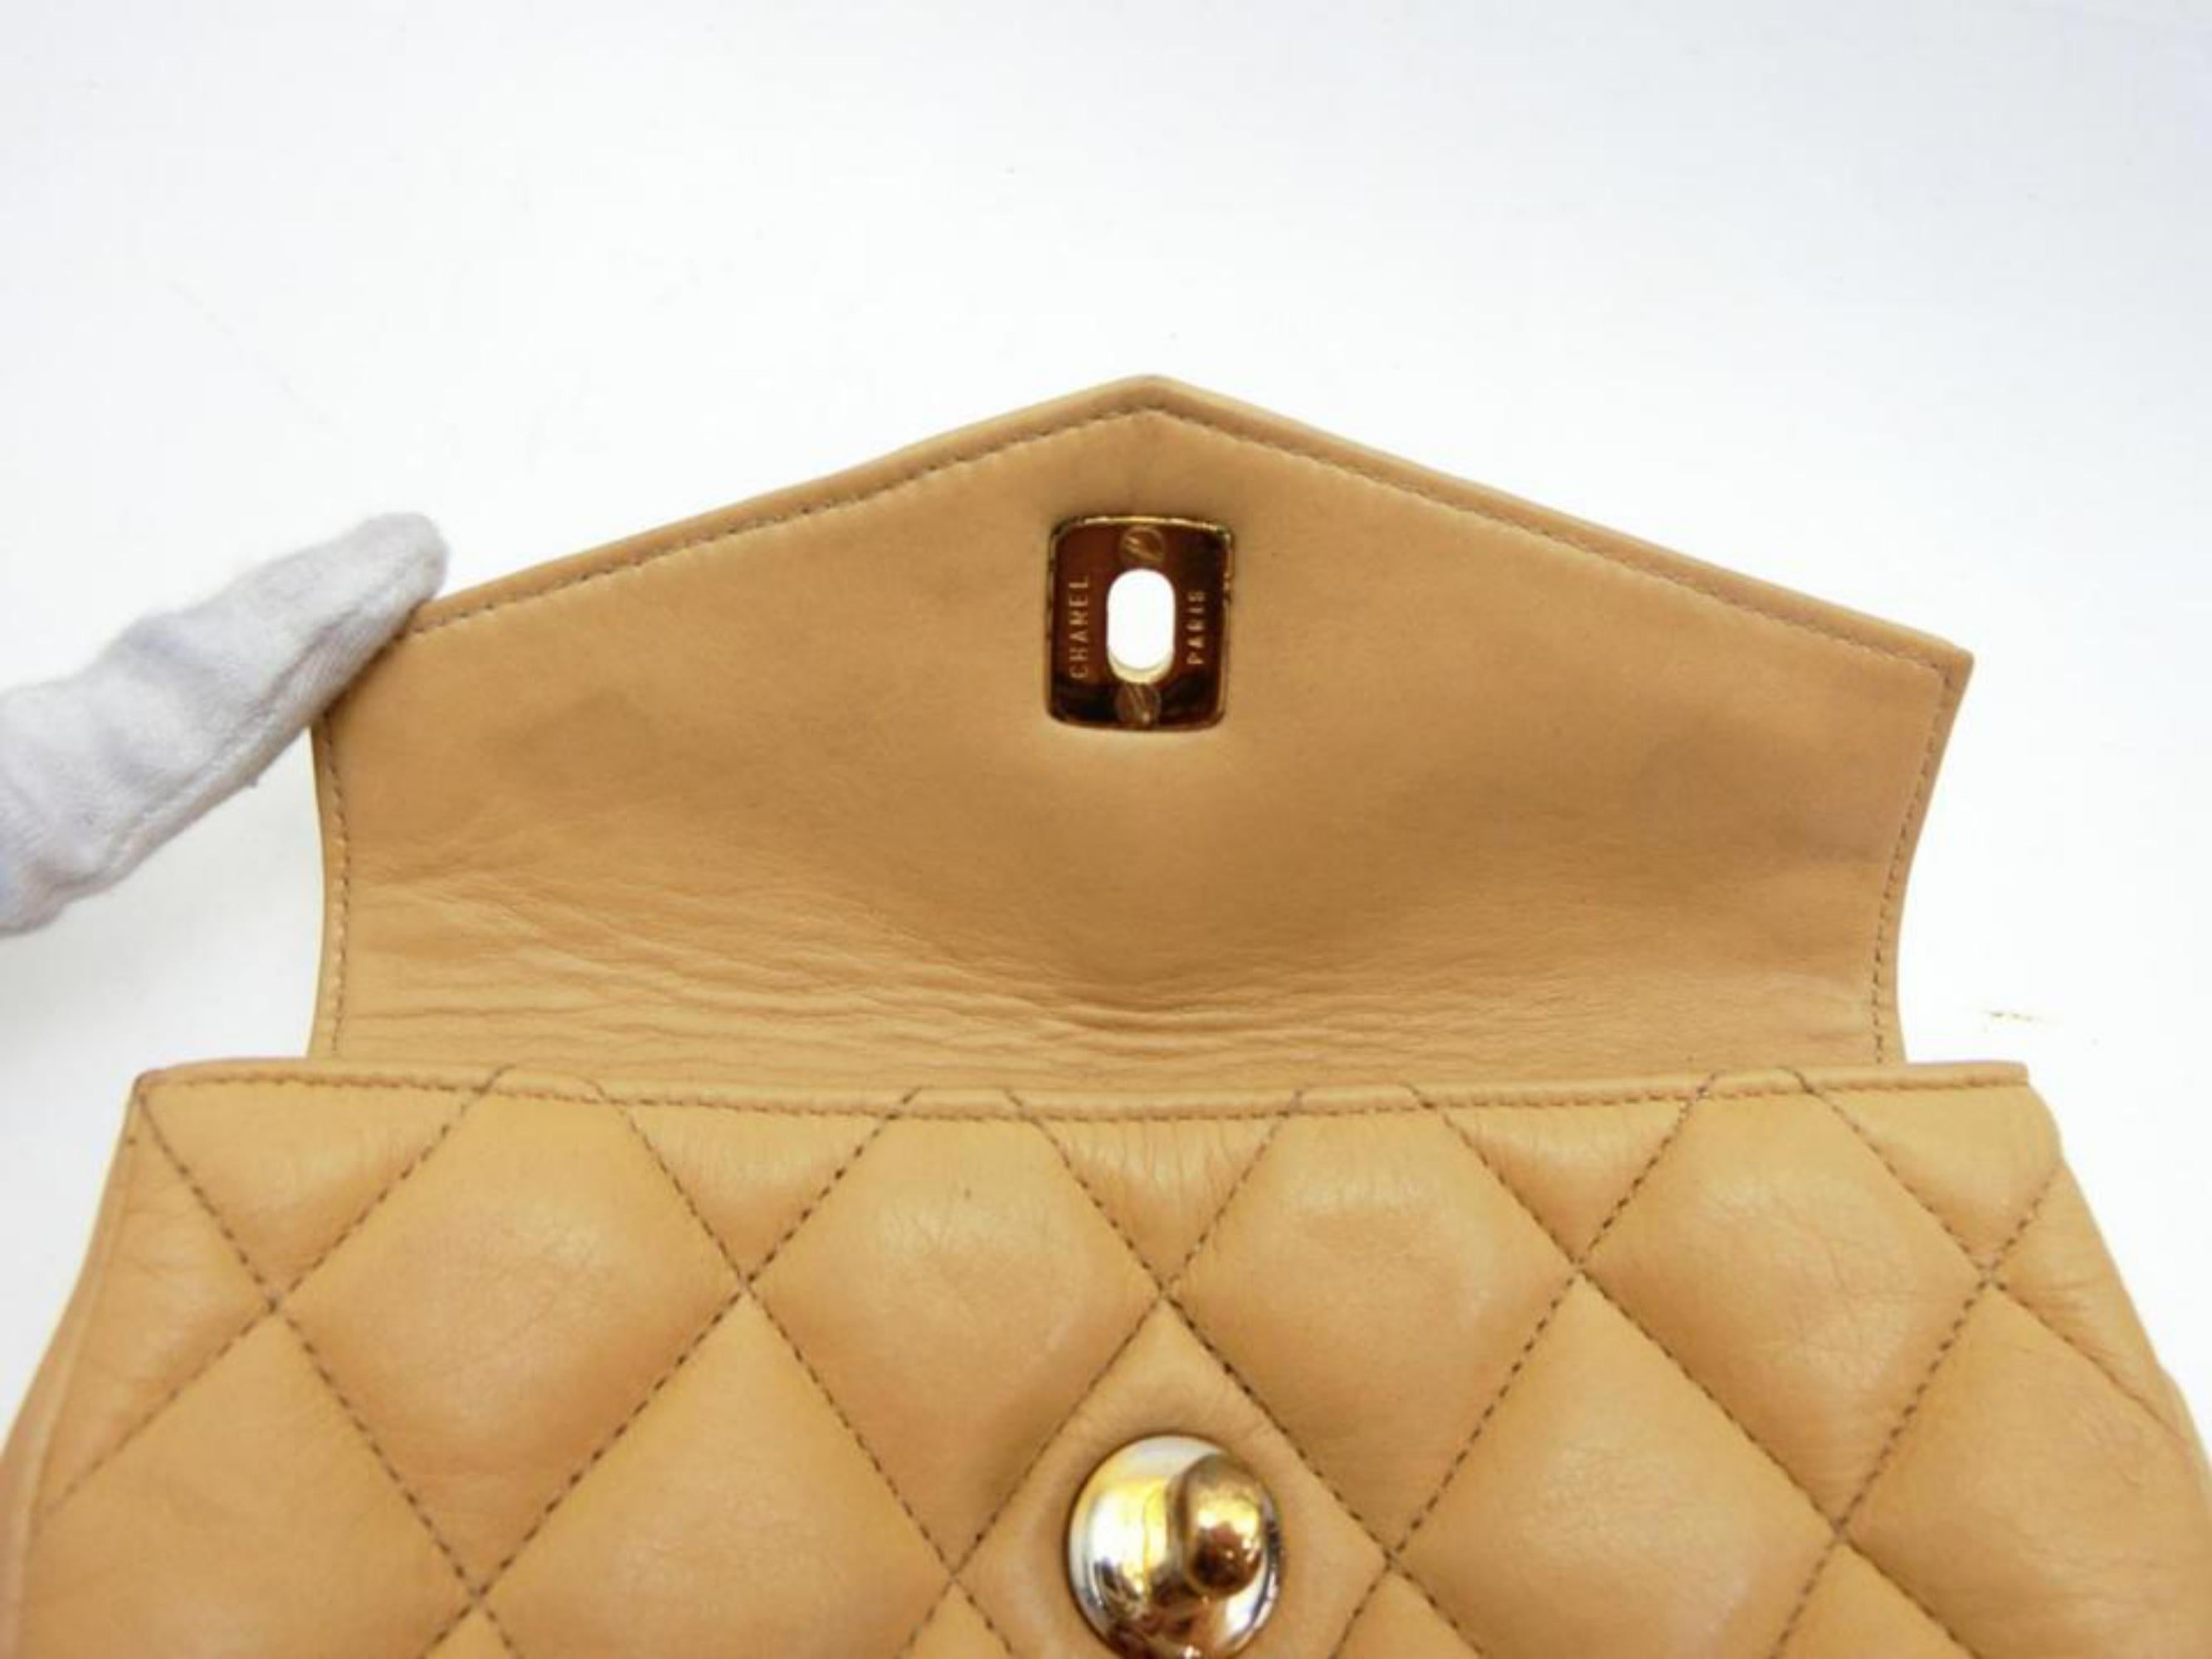 Chanel Waist Bag Quilted Fanny Pack 231225 Beige Leather Cross Body Bag In Fair Condition For Sale In Forest Hills, NY